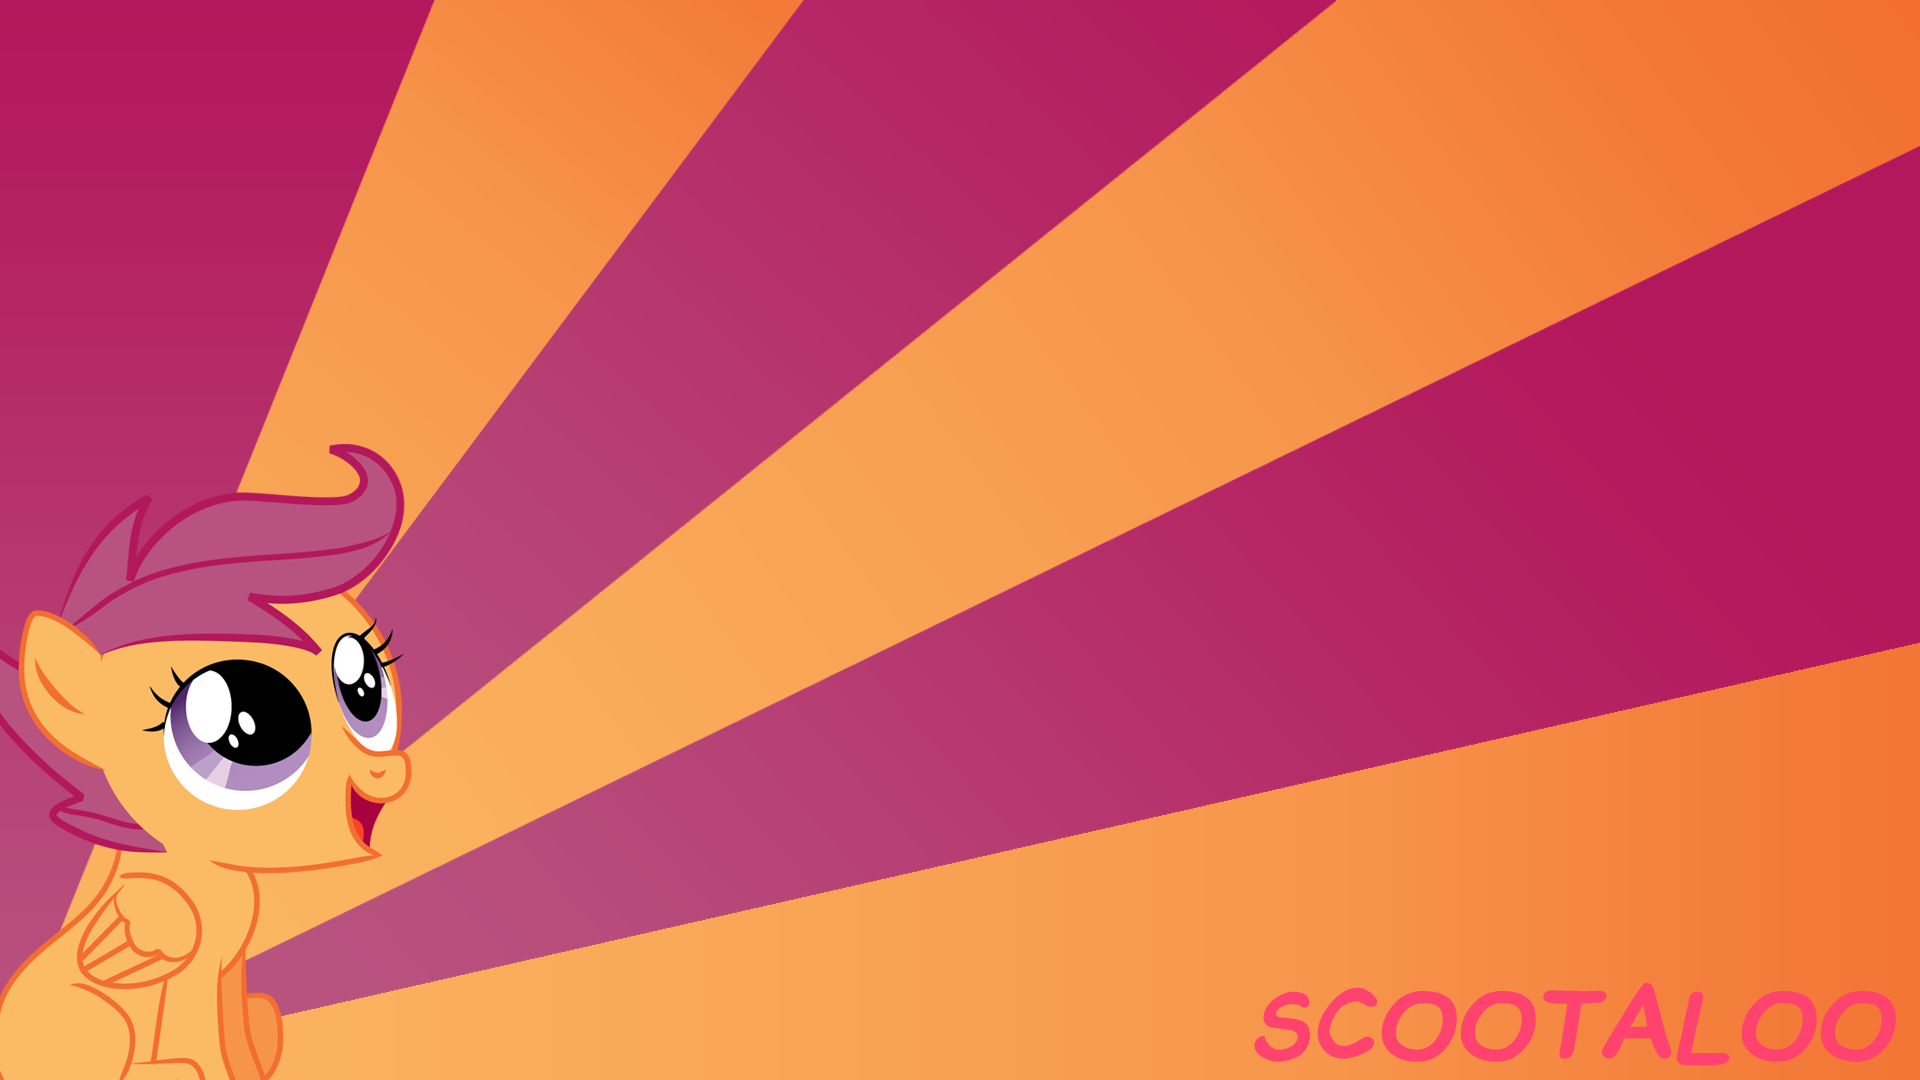 Scootaloo Wallpaper by BlueDragonHans and Creshosk